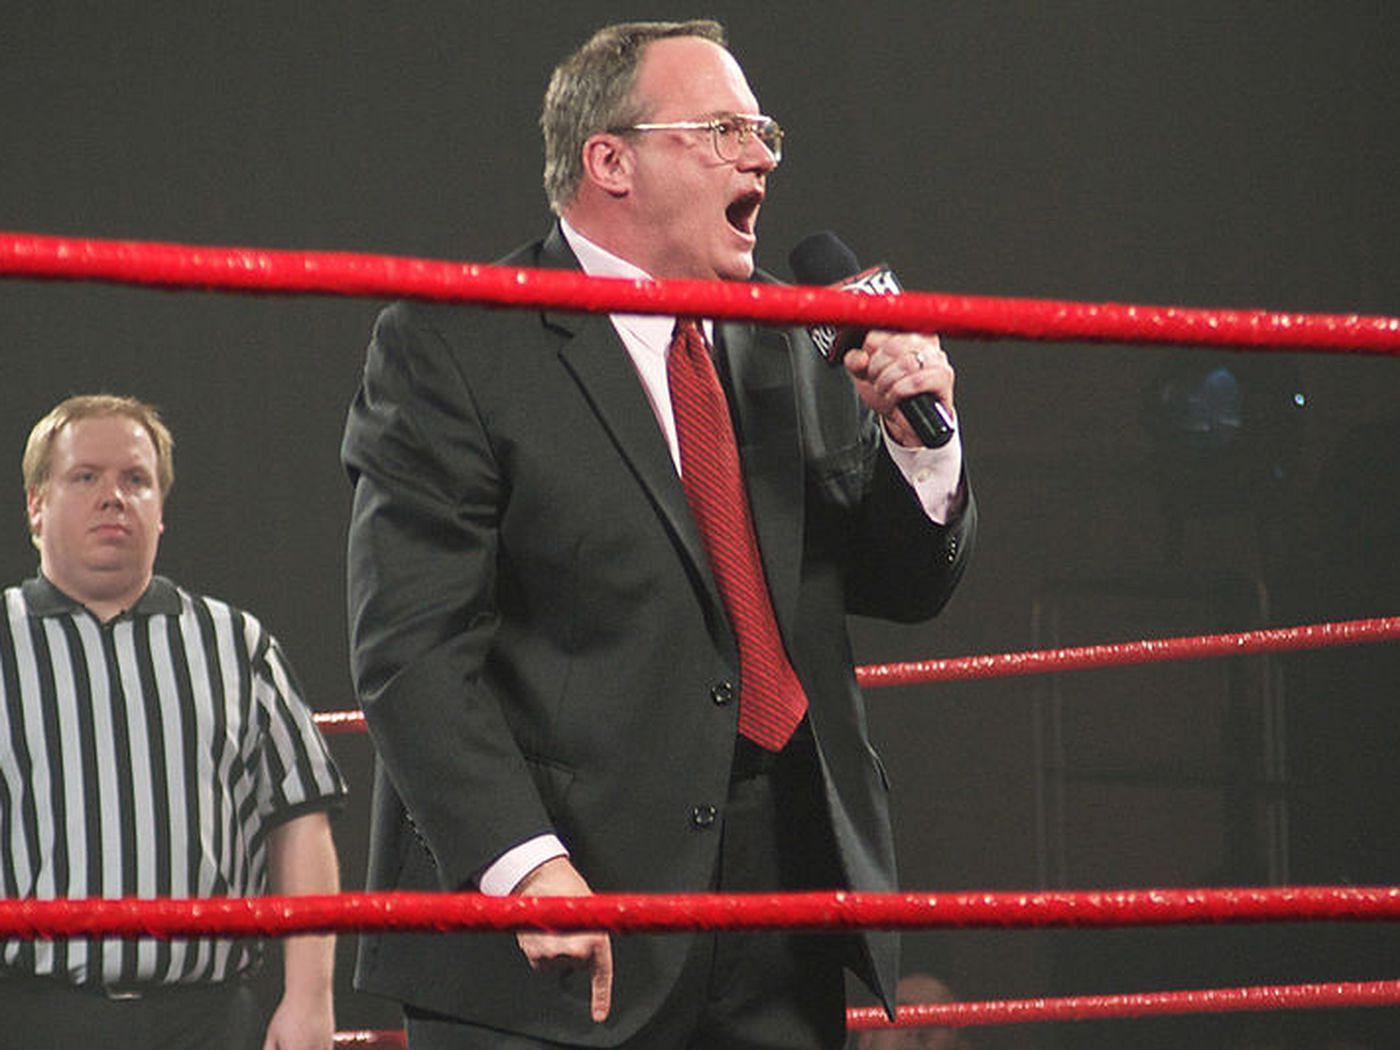 Cornette has been known recently for his comments on AEW